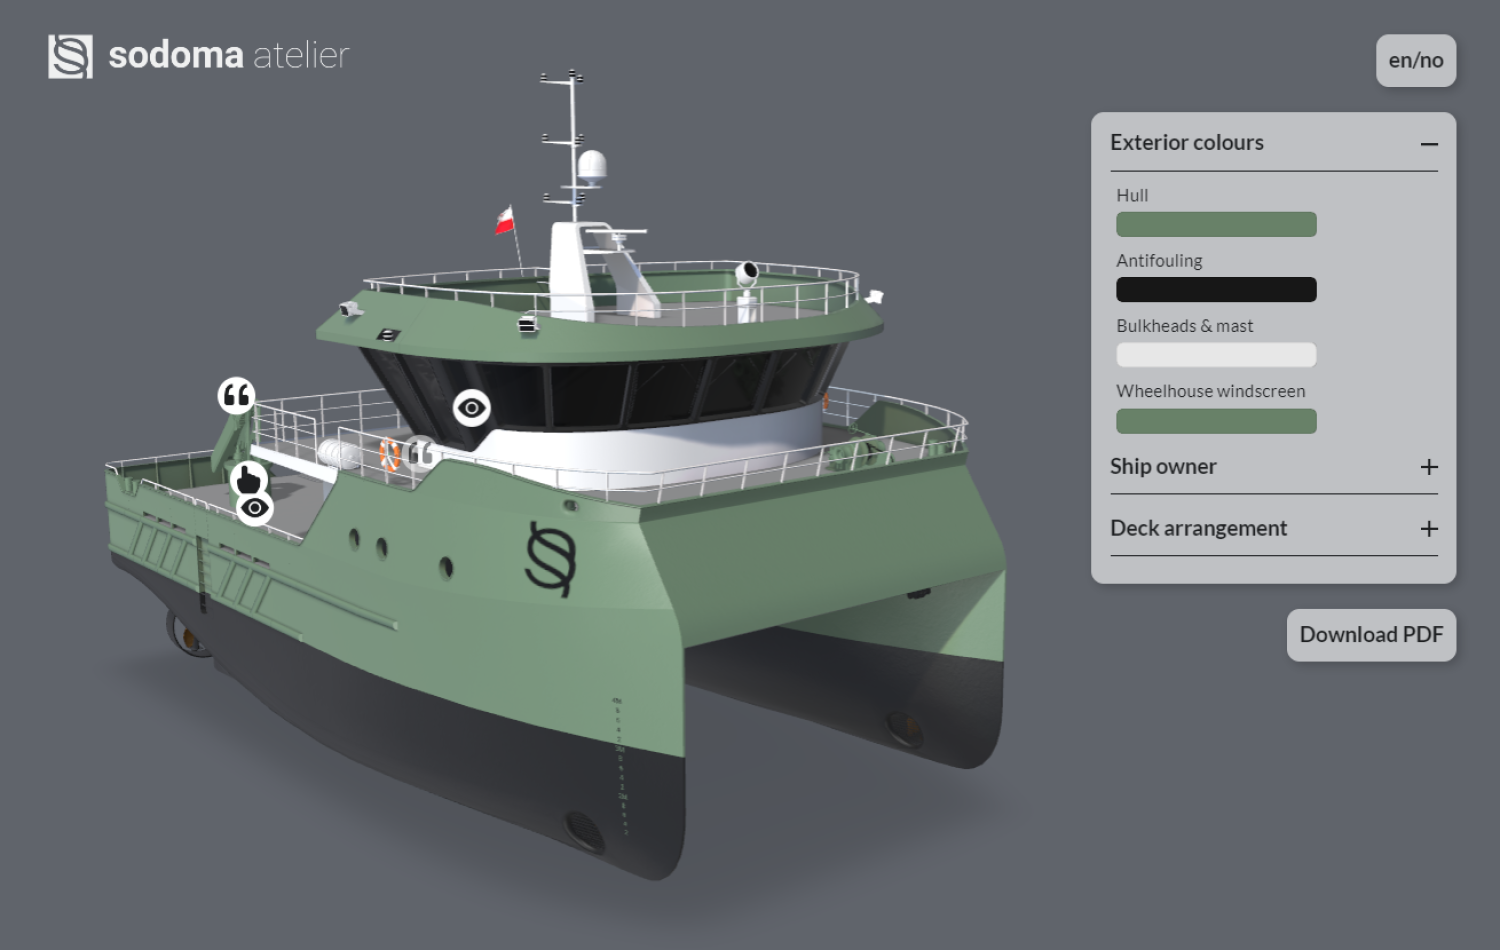 3D Boat Viewer - 3D Ship viewer of an interactive workboat where you can customize the hull colors